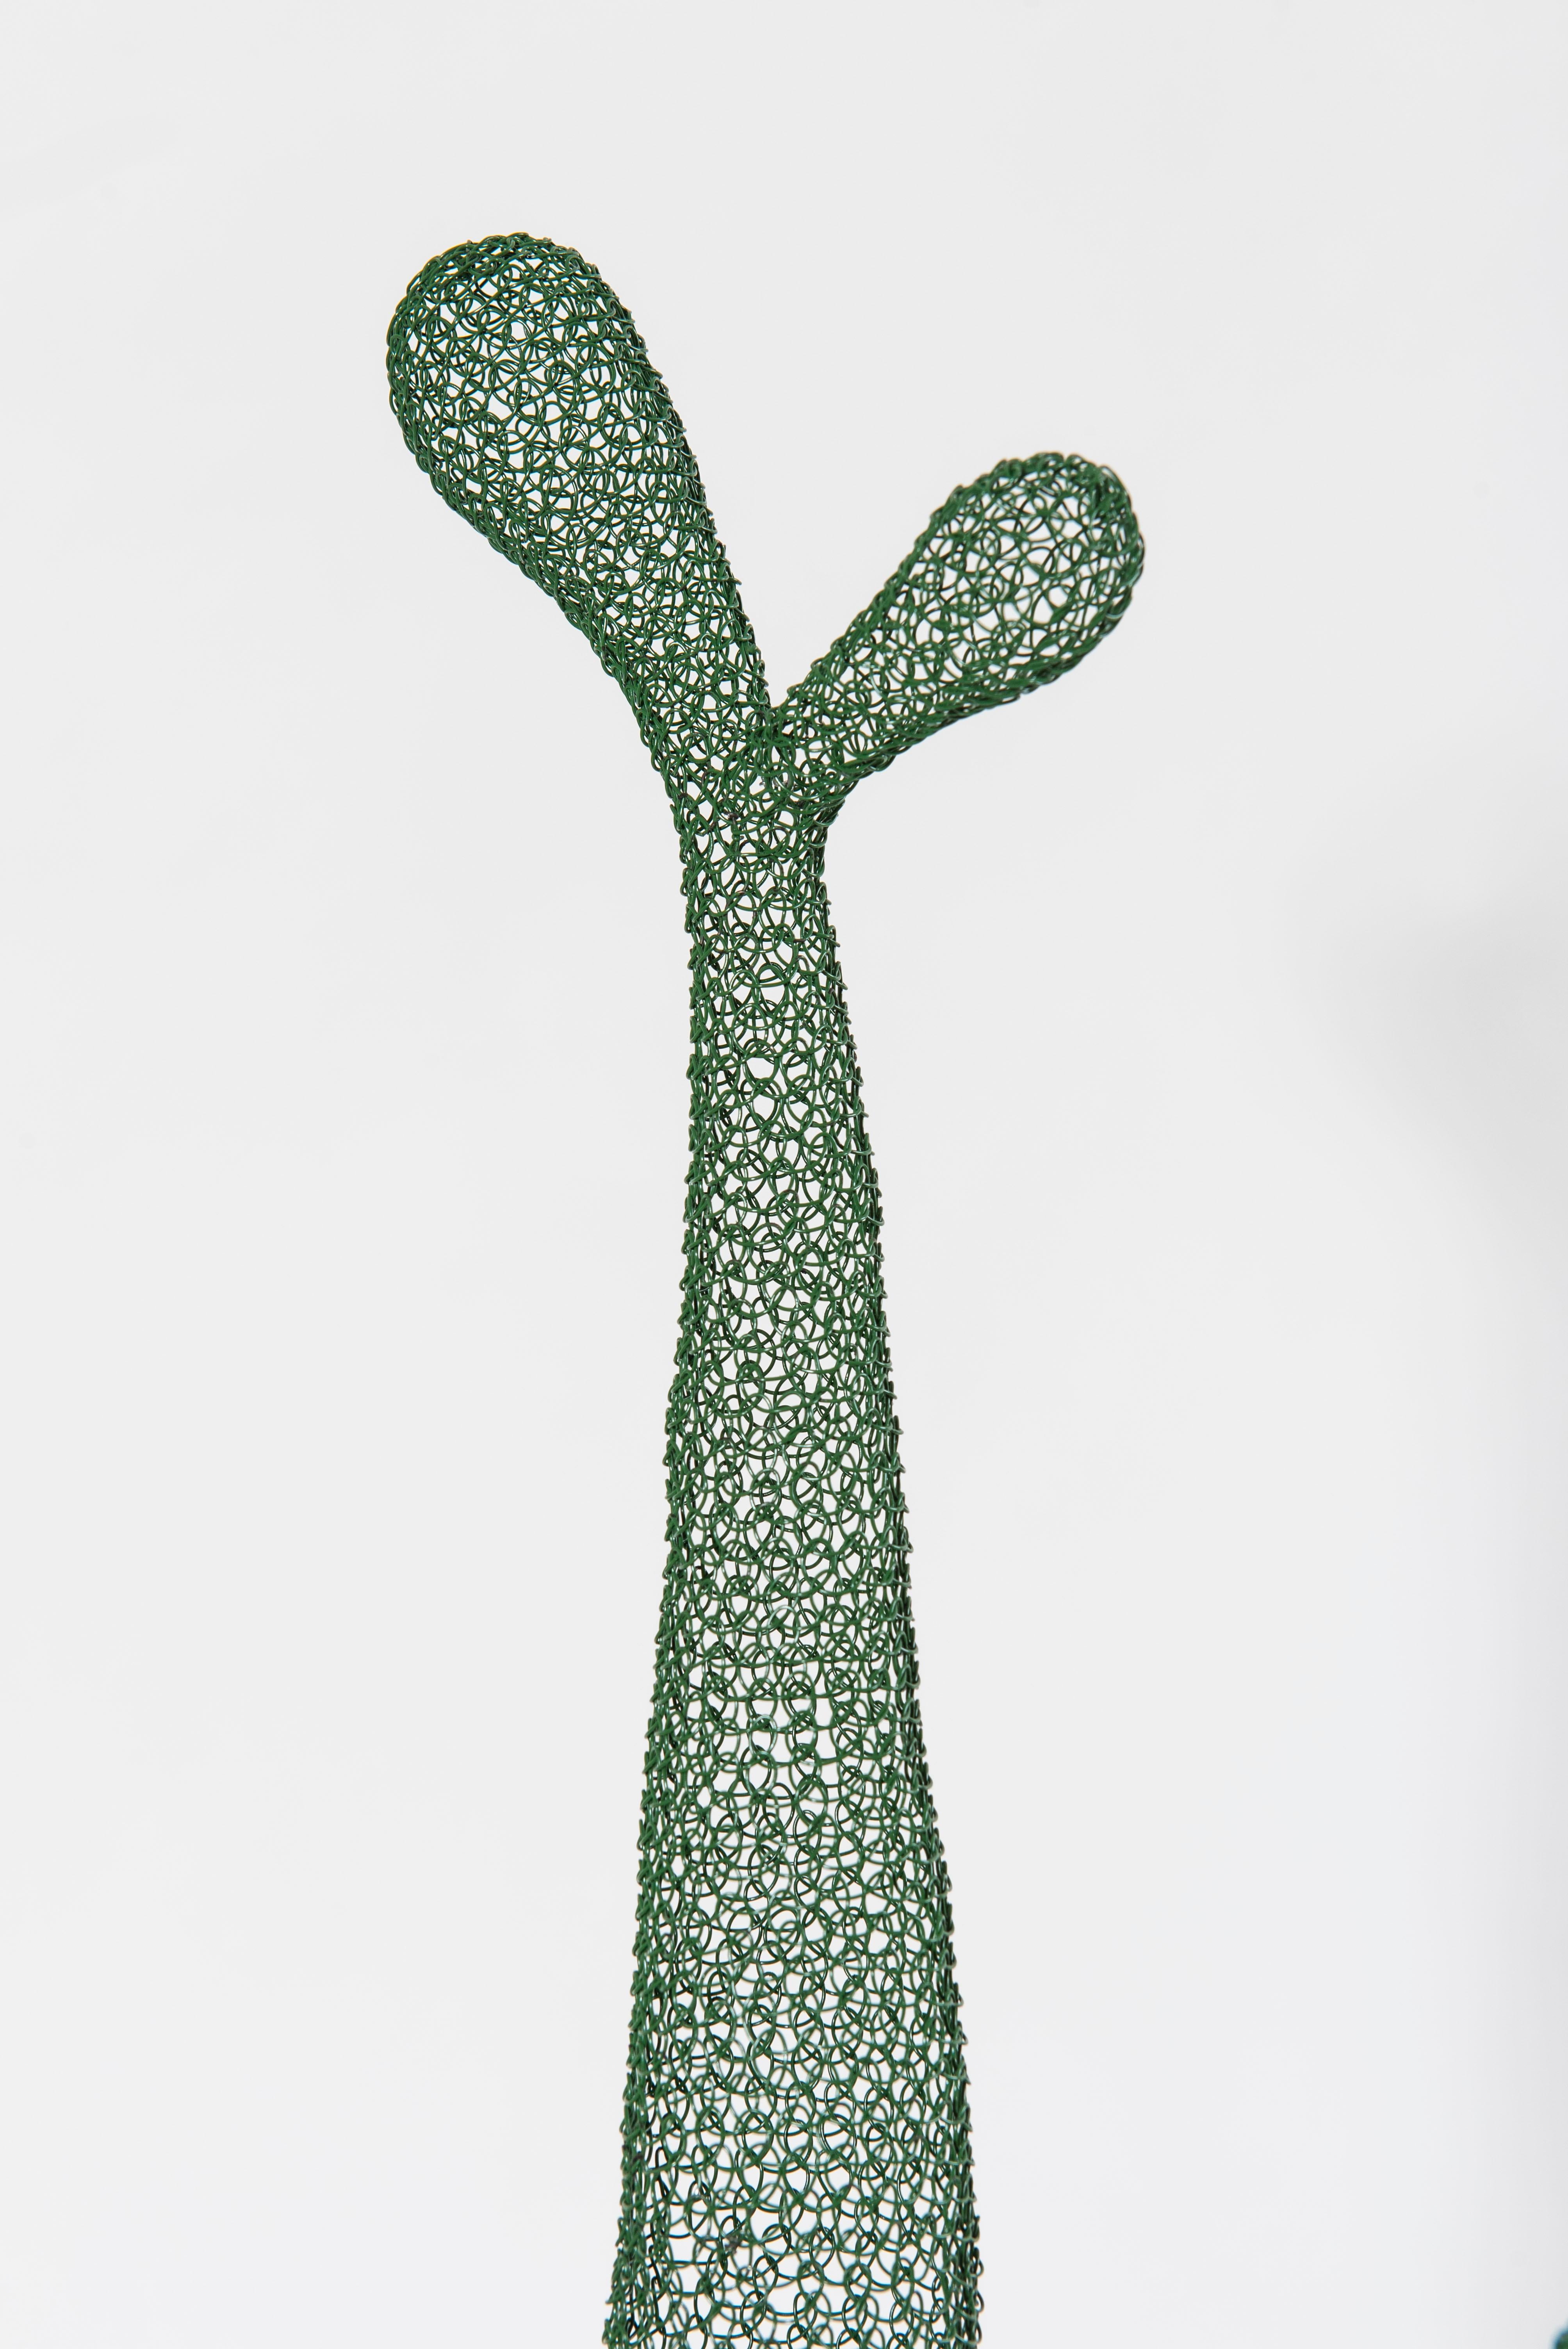 This mesh-work sculpture named « 6 Cactus » is entirely hand-knitted from a single metal wire plasticized in green. It was created and made by artist Delphine Grandvaux. This work consists of six similar and independent parts, each of which